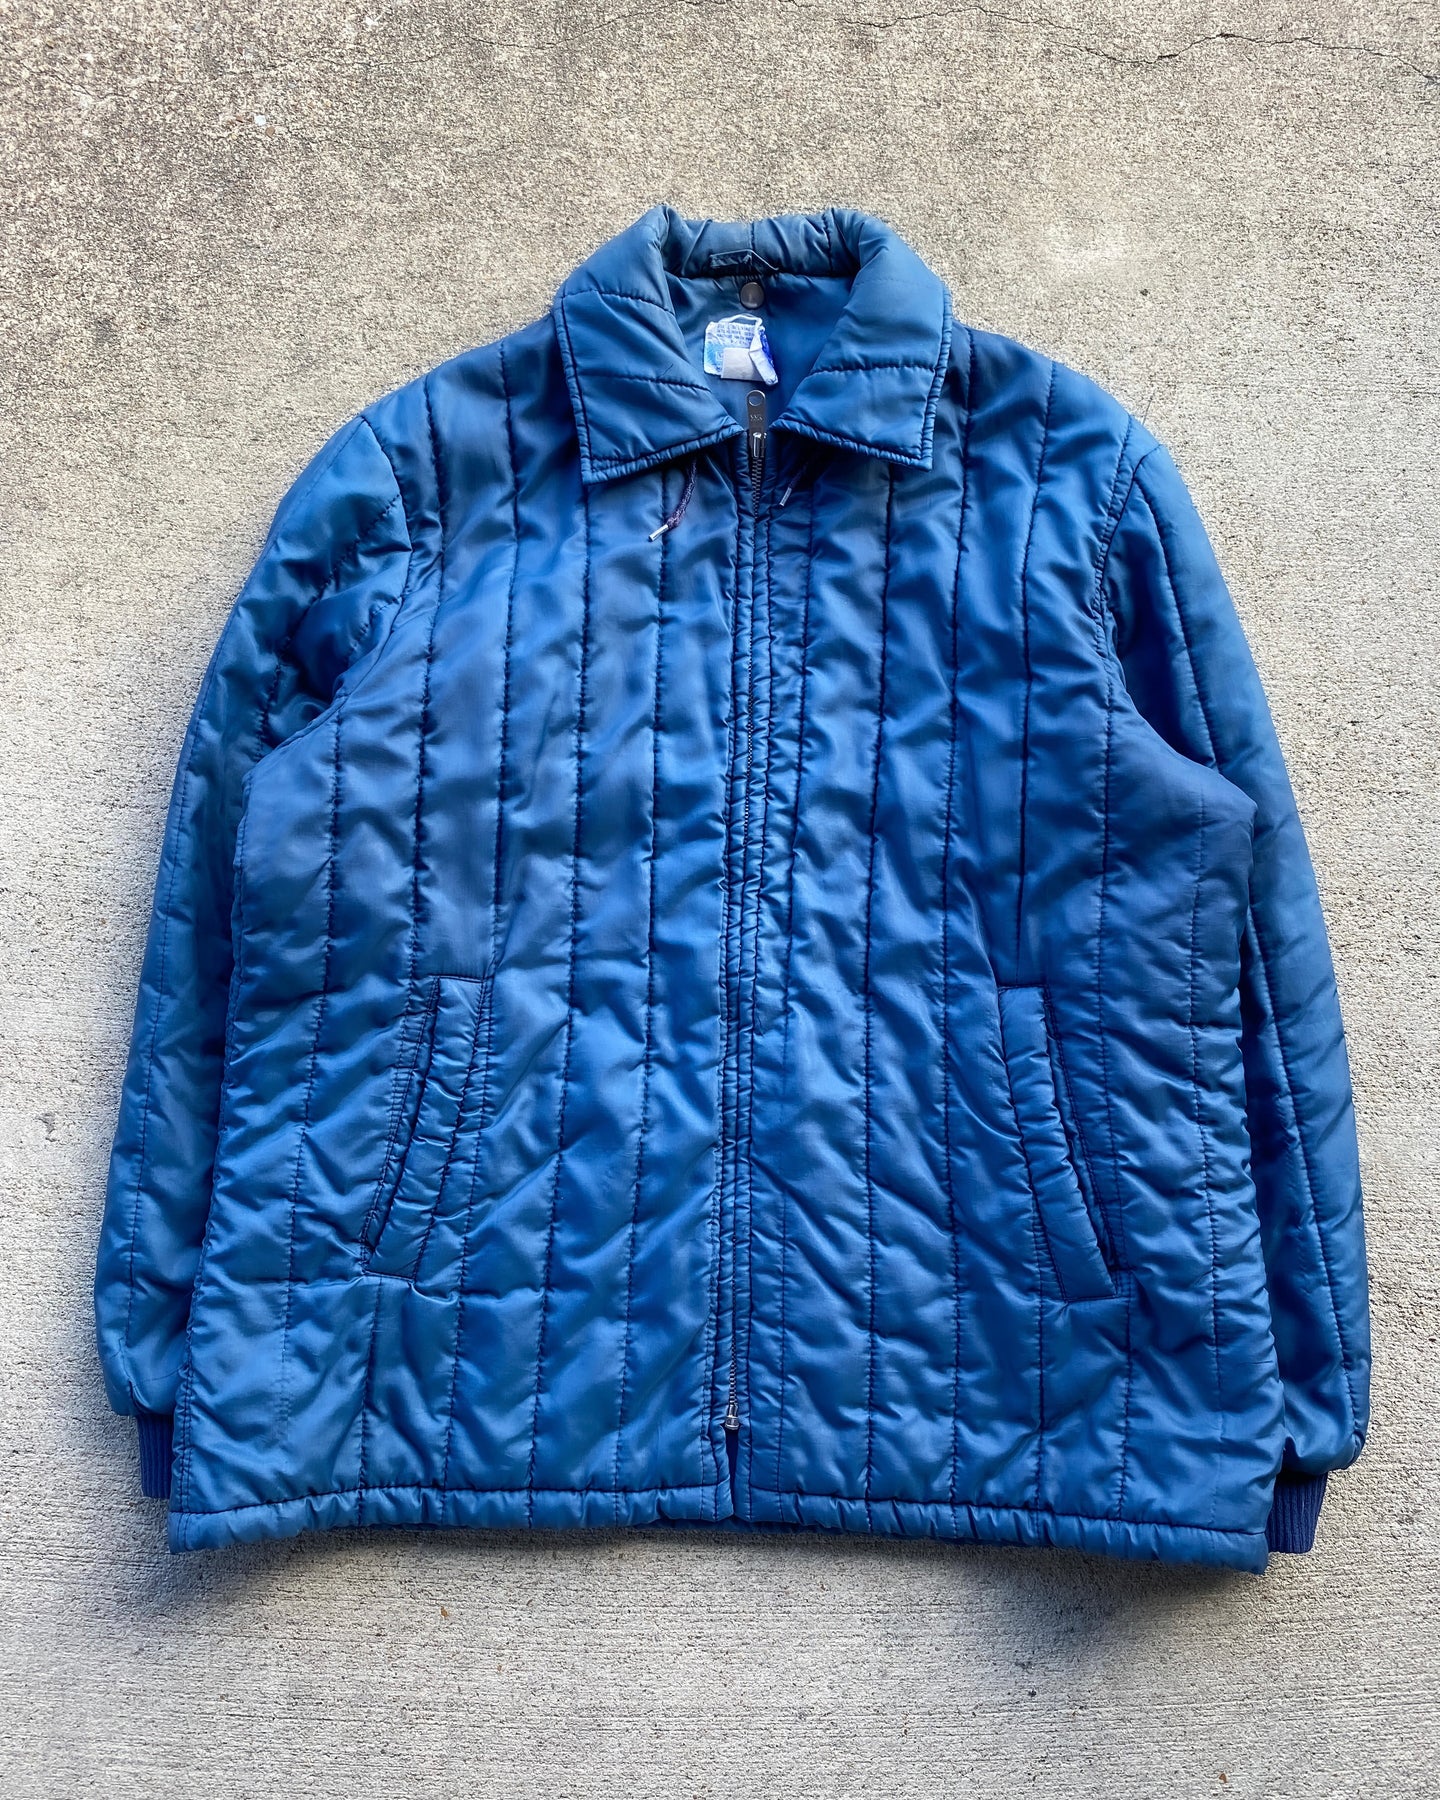 1980s Sears Puffer Jacket - Size Large